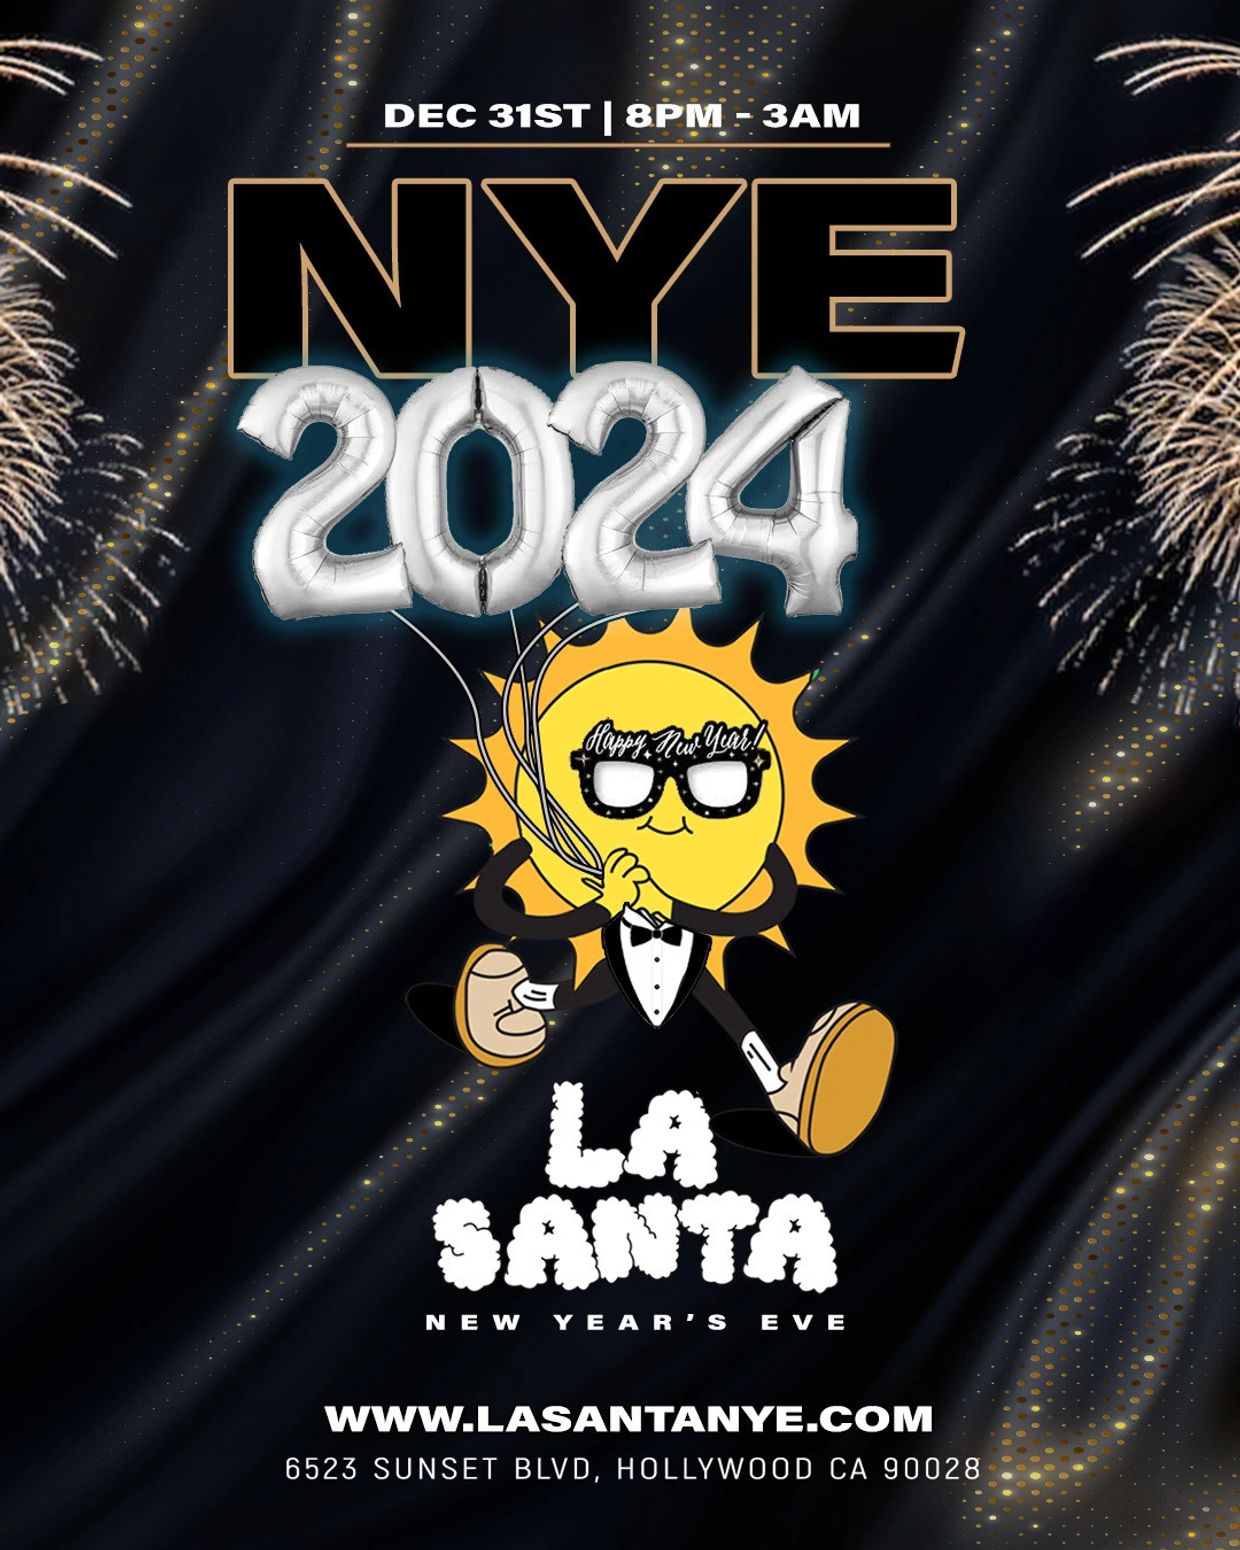 New Years Eve